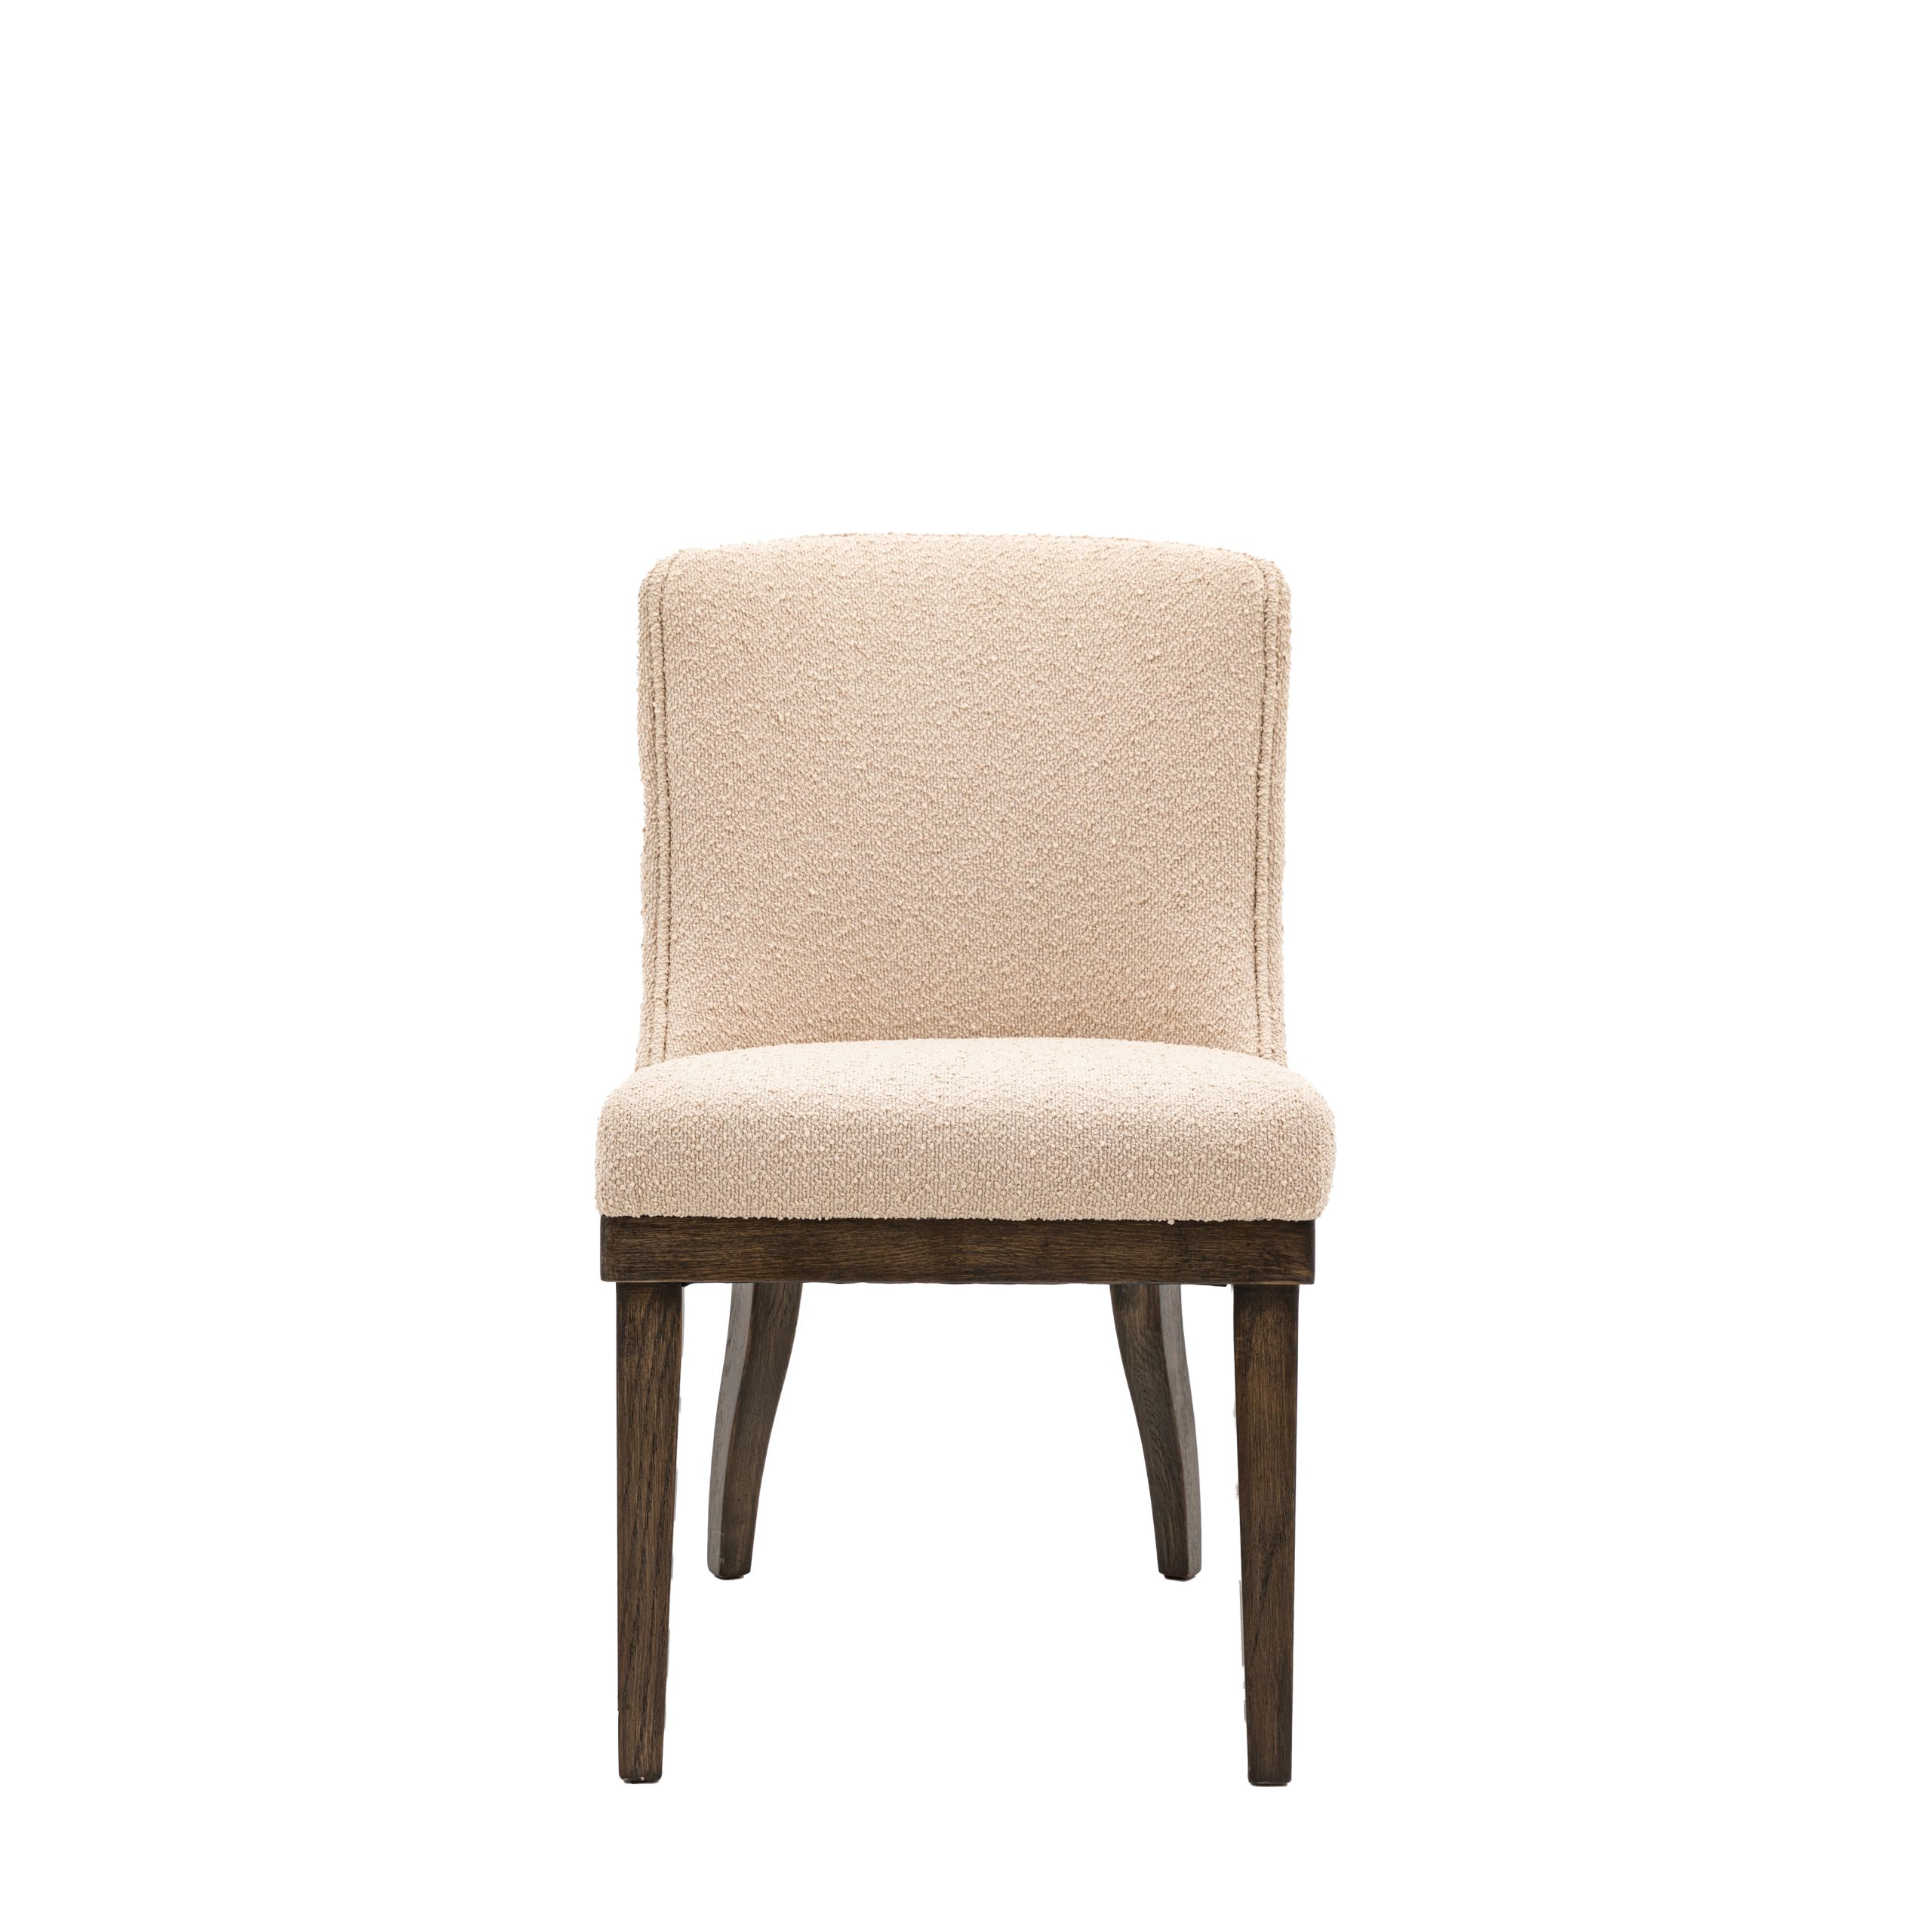 Gallery Direct Kelvedon Dining Chair Taupe (Set of 2)